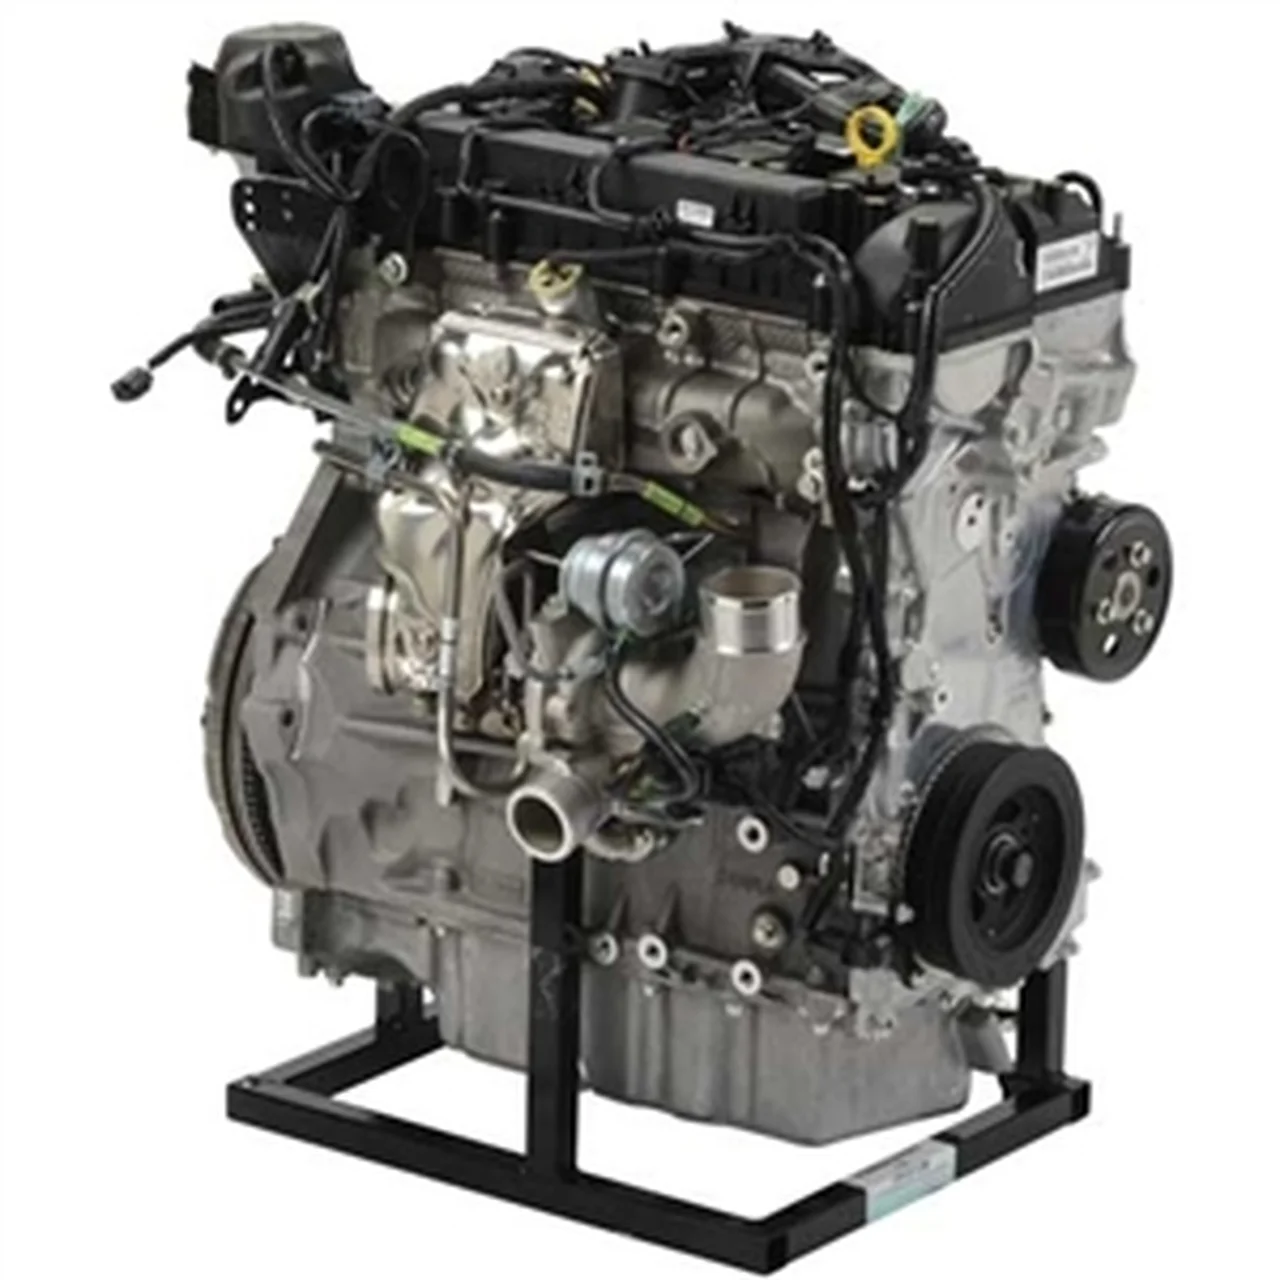 Ford 2.3L EcoBoost Engine Info, Power, Specs, Wiki